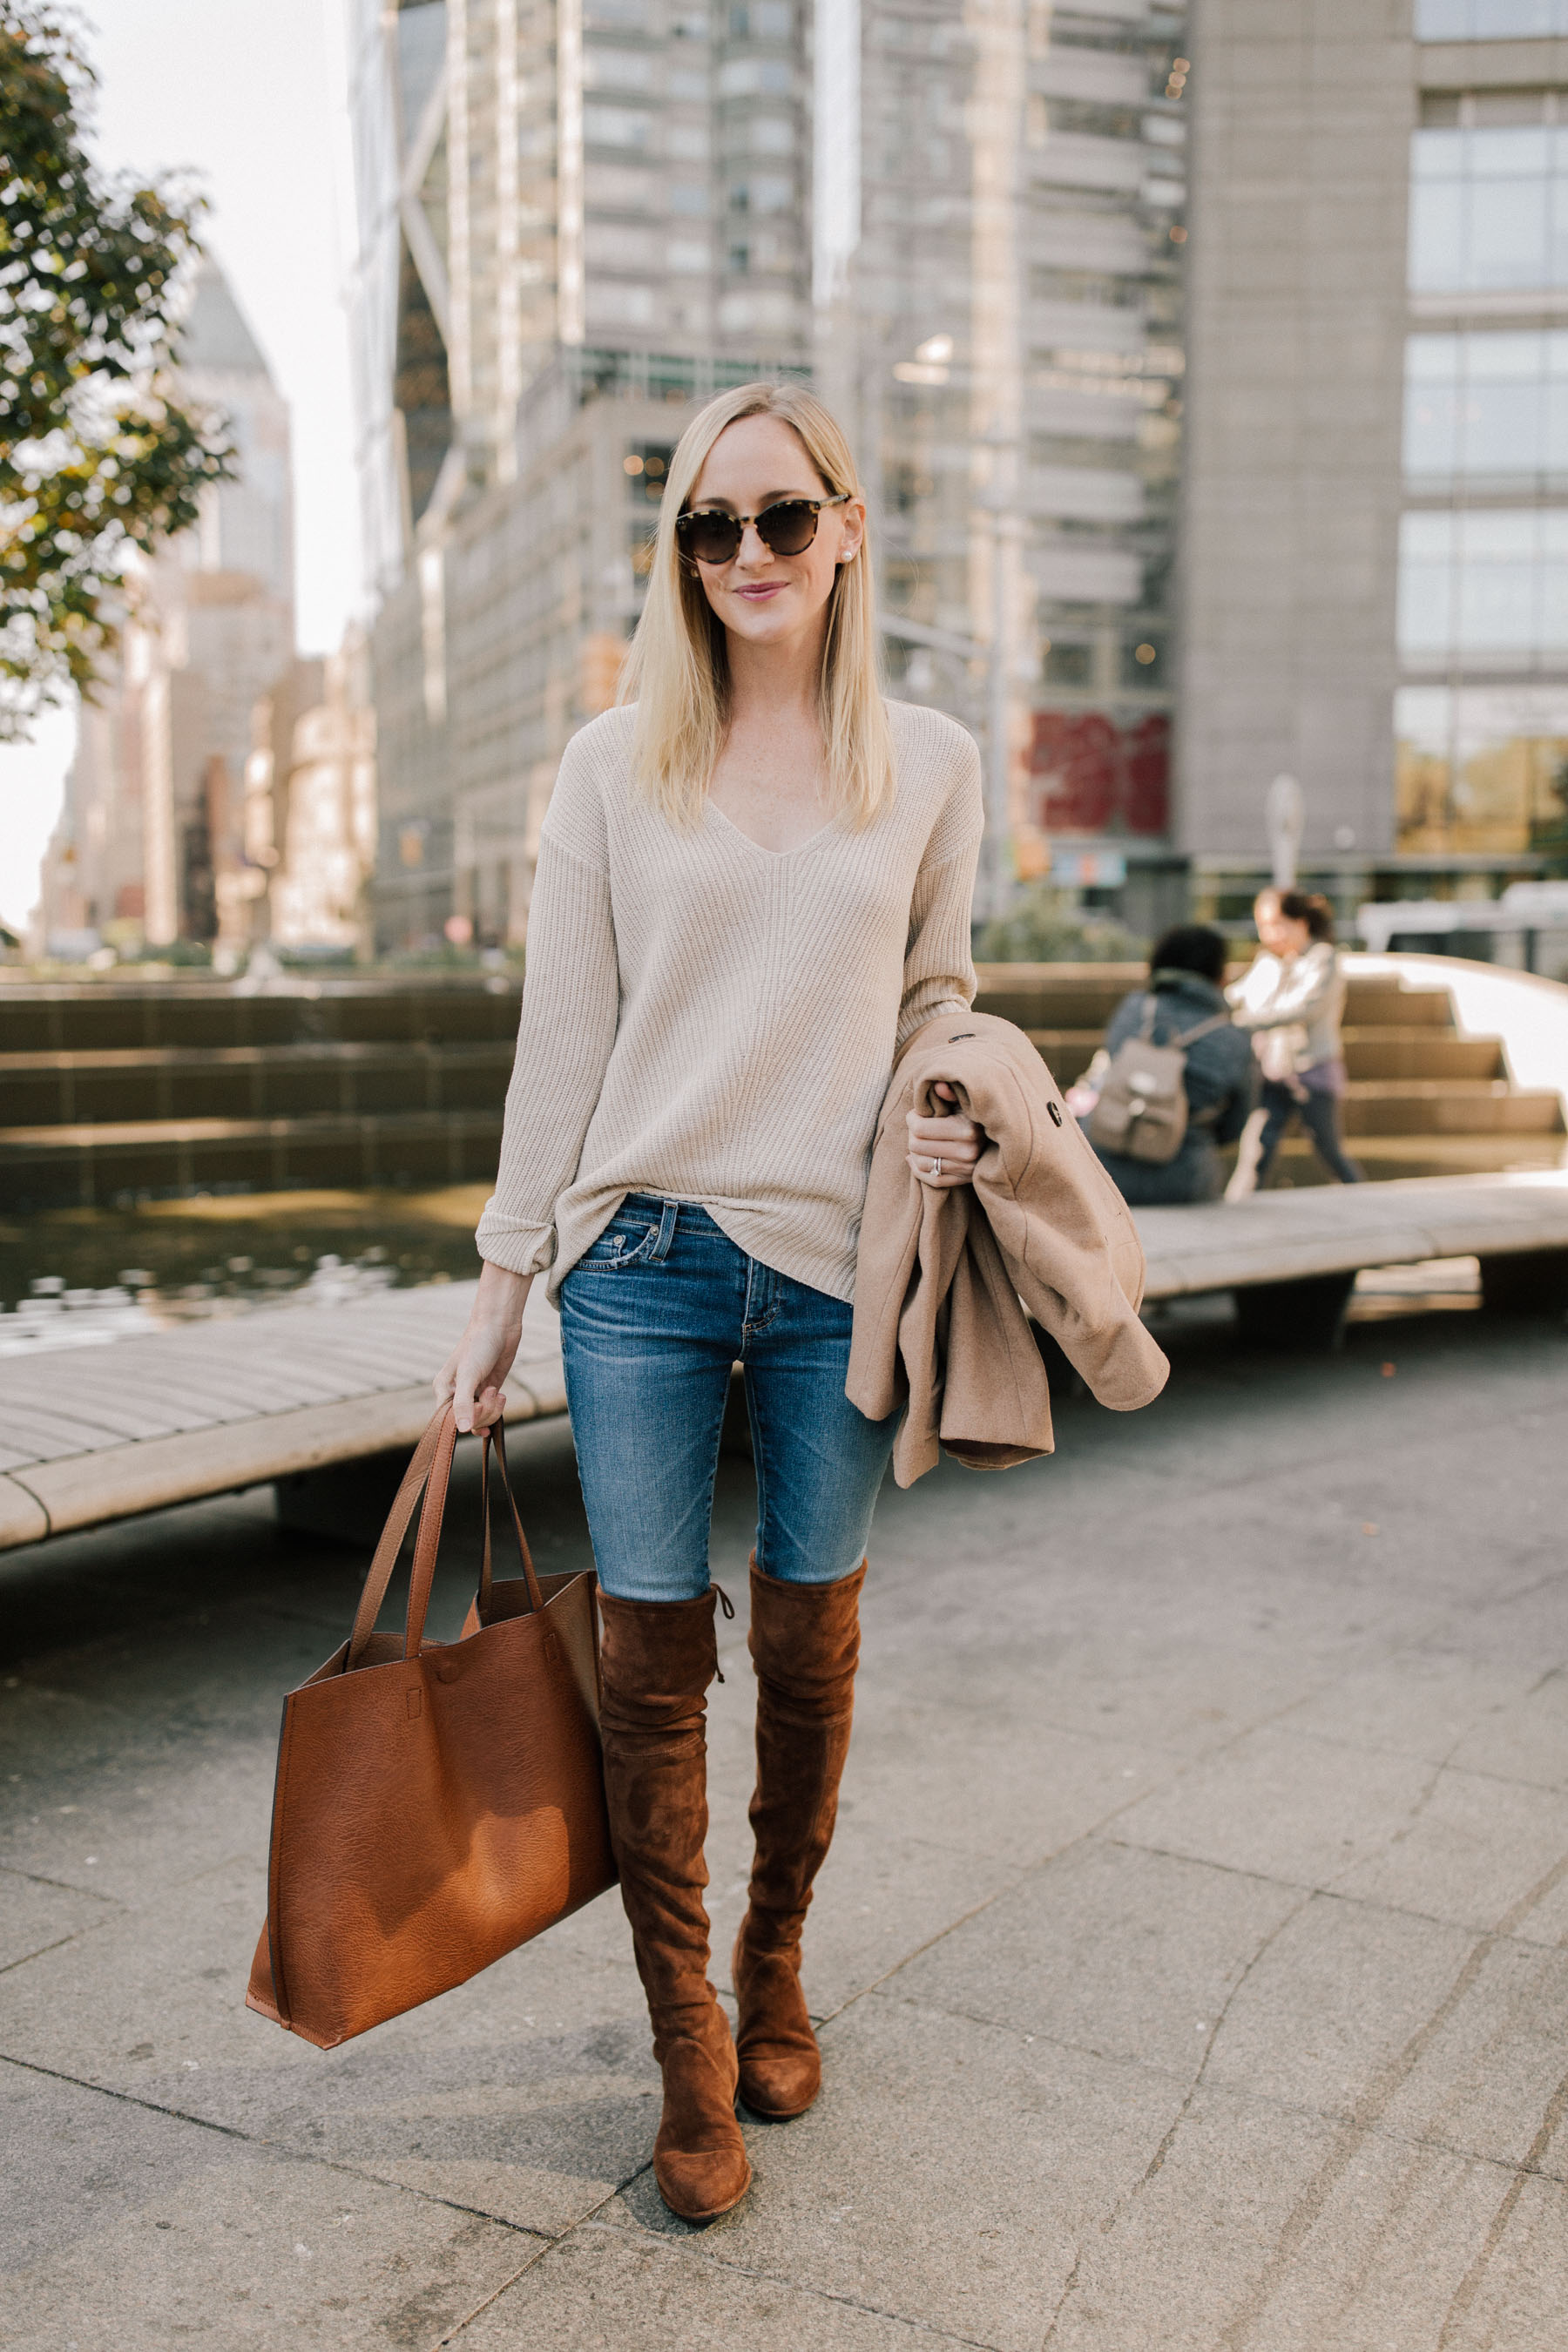 Columbus Circle Outfit - Kelly Larkin of Kelly in the City